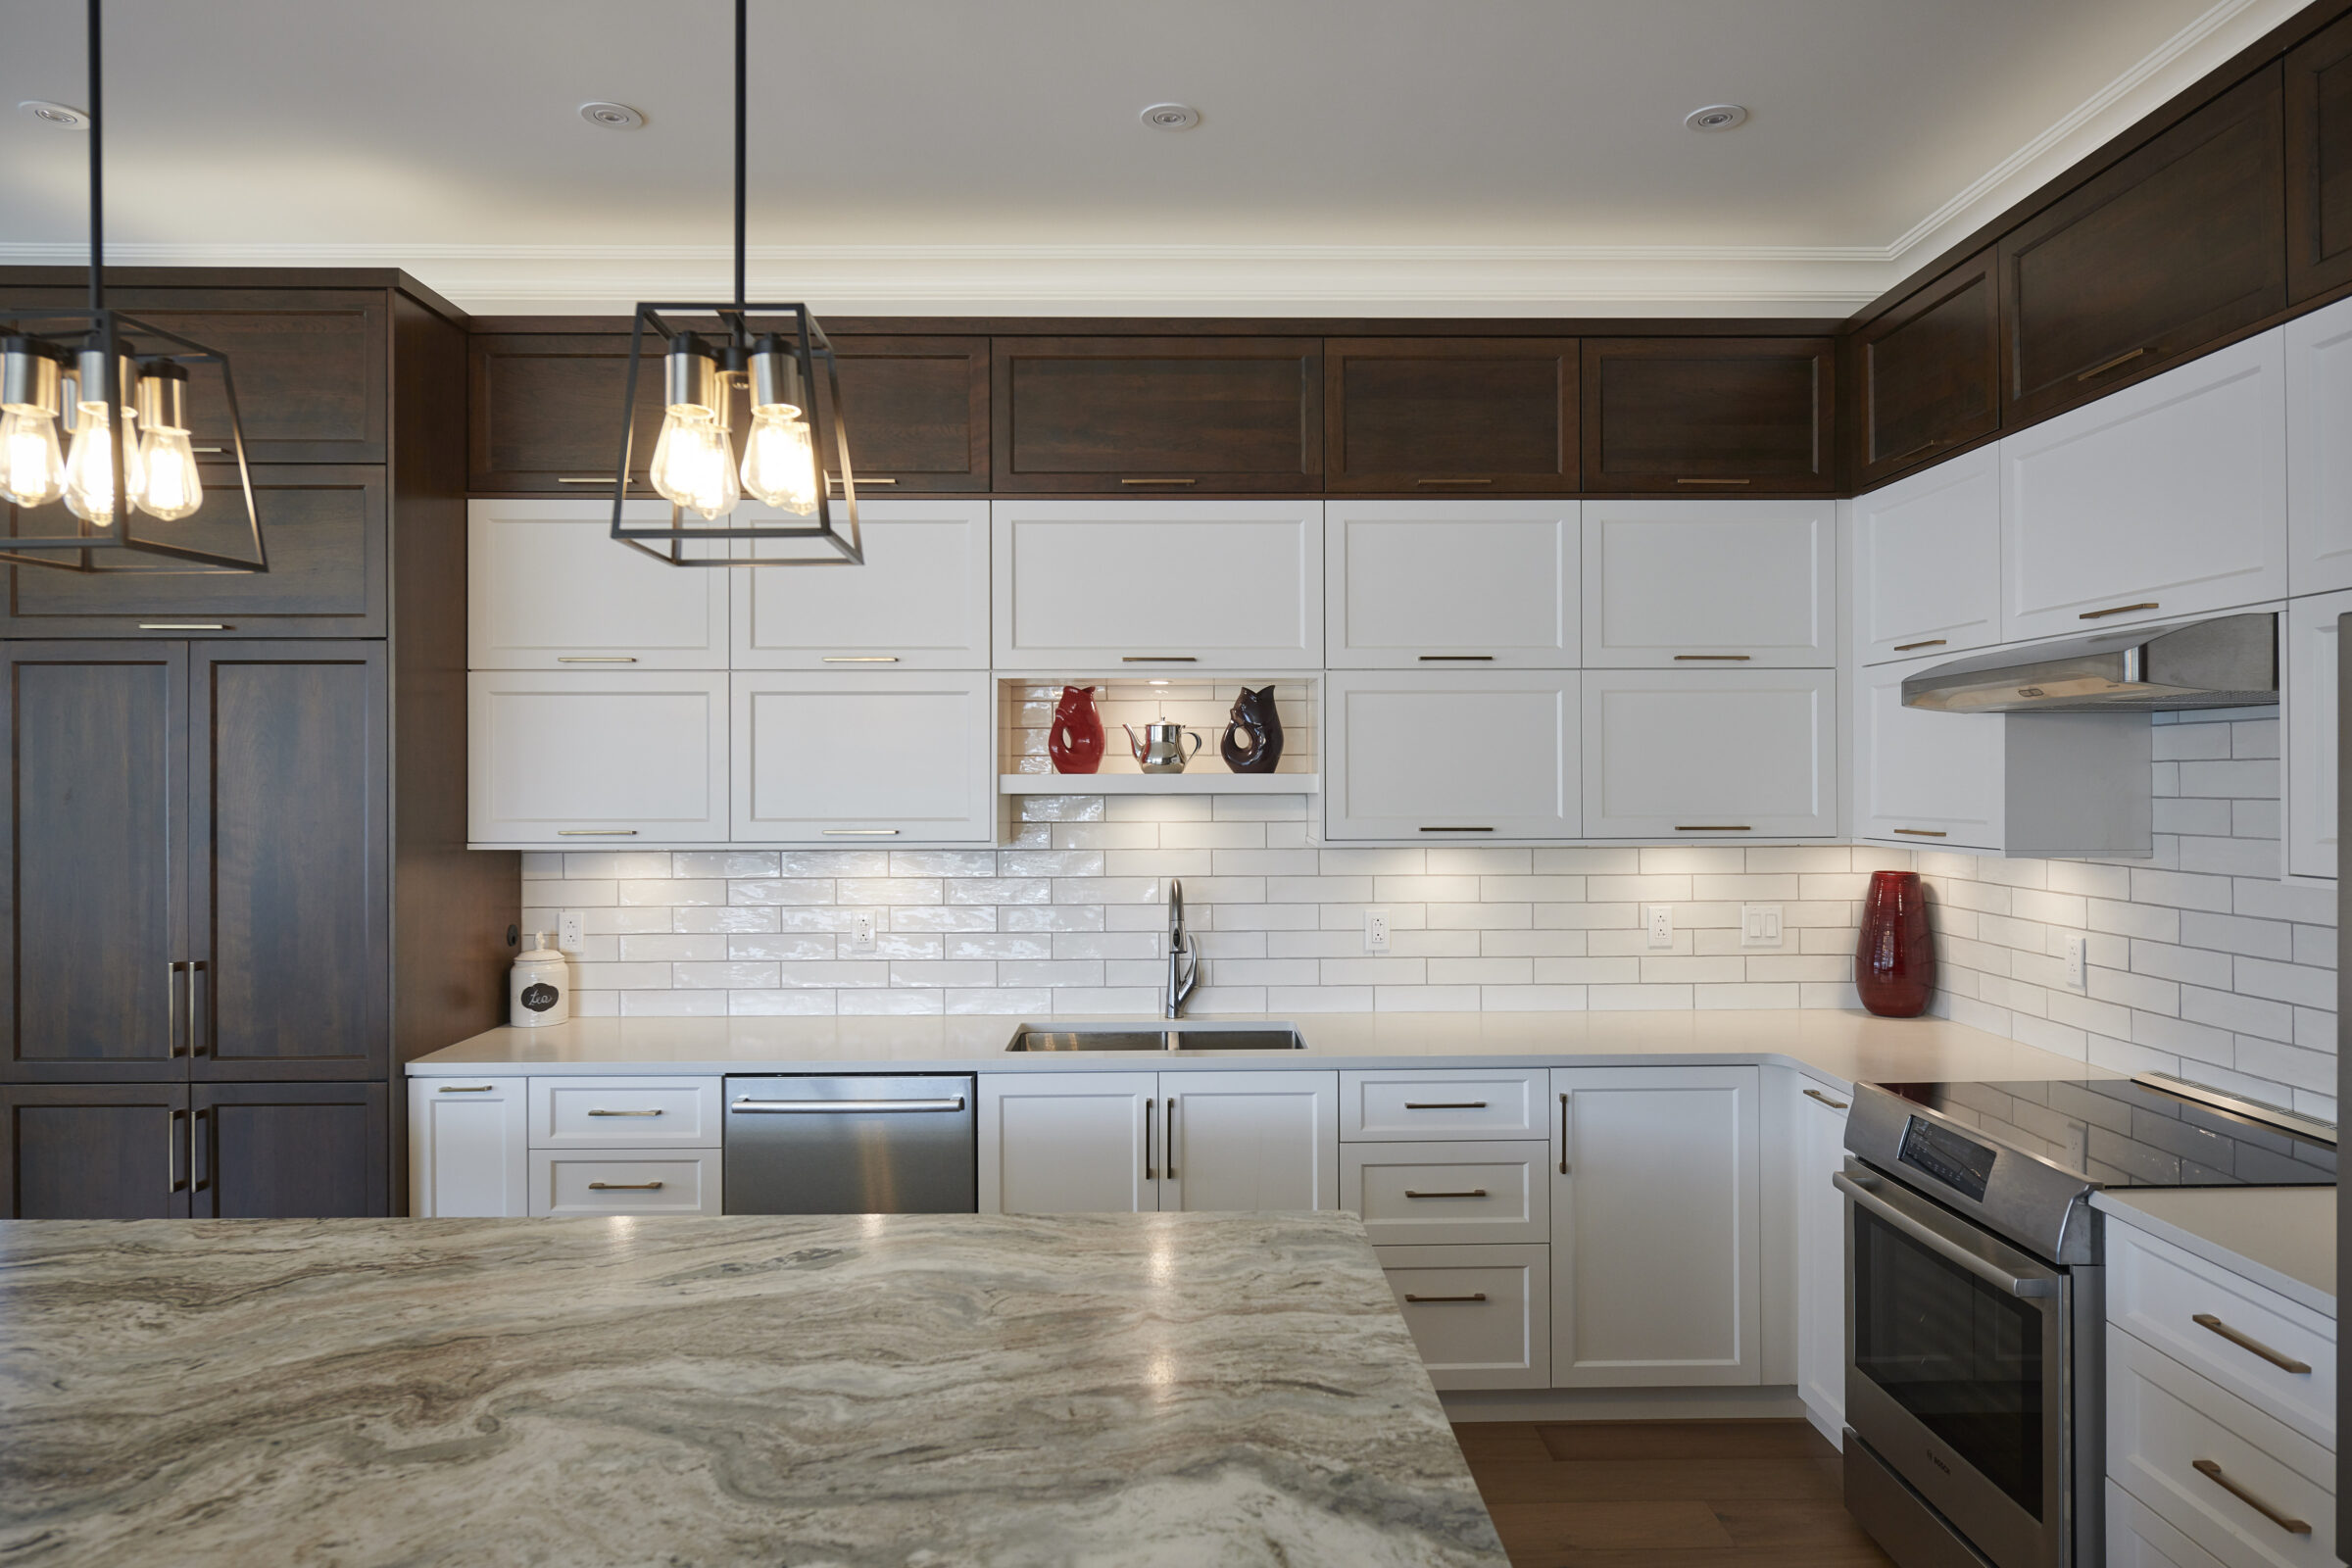 Modern kitchen interior with white and dark wood cabinets, subway tile backsplash, stainless steel appliances, and hanging pendant lights over an island.